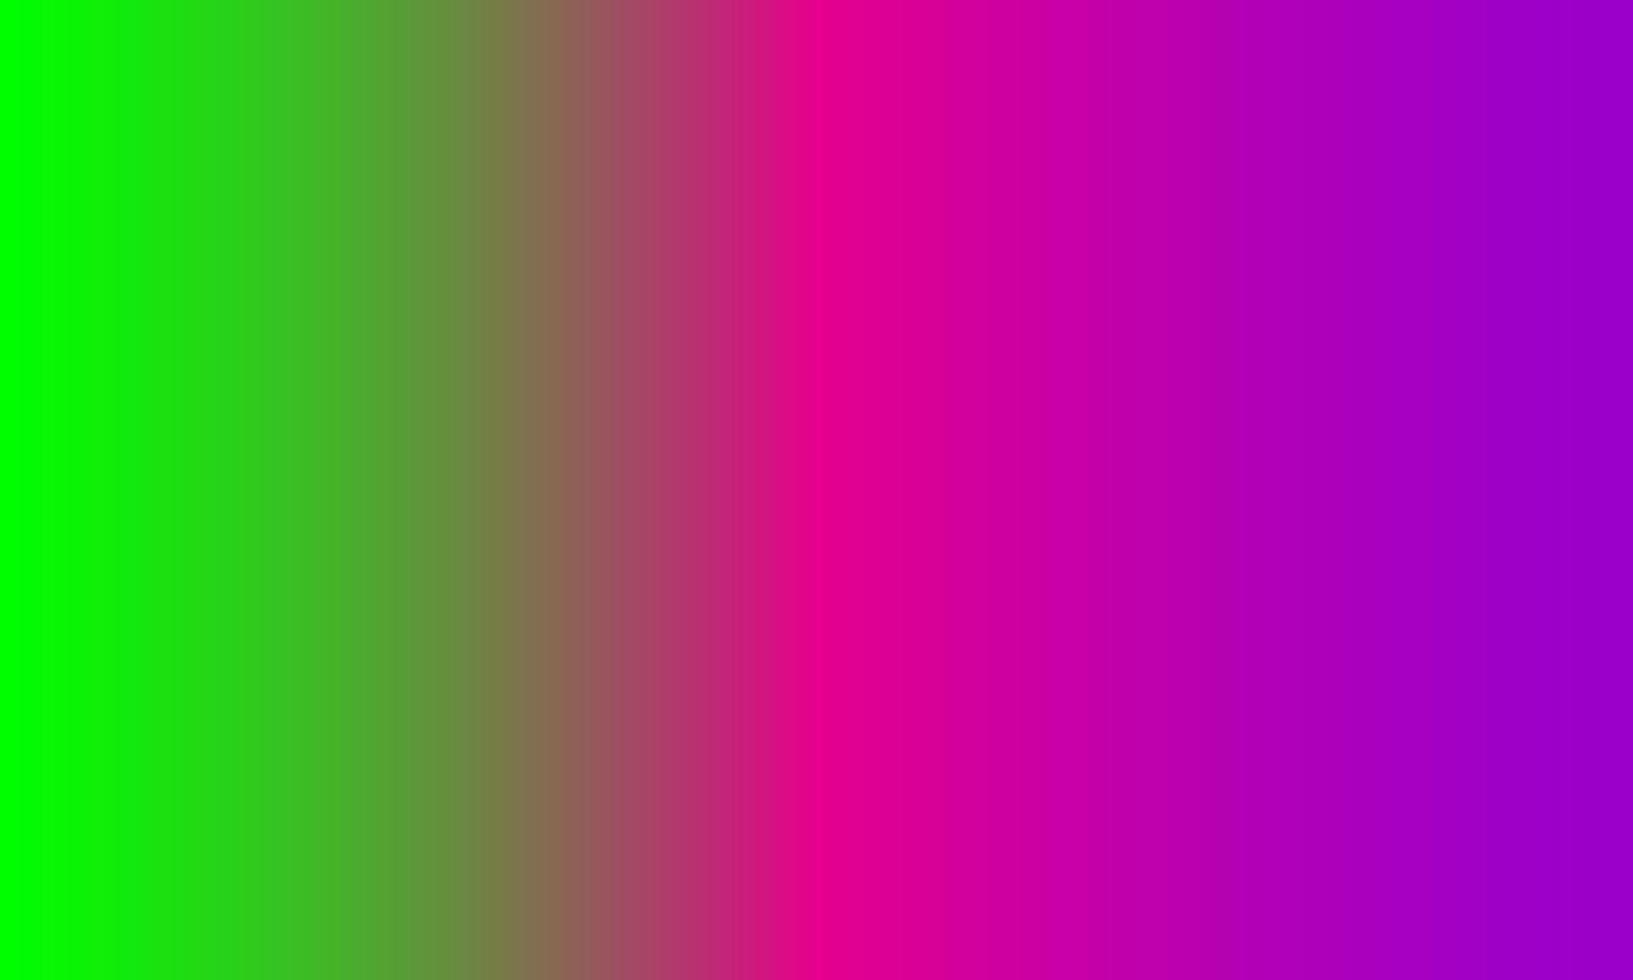 green, pink and purple gradient. abstract, blank, clean, colors, cheerful and simple style. suitable for background, banner, flyer, pamphlet, wallpaper or decor vector